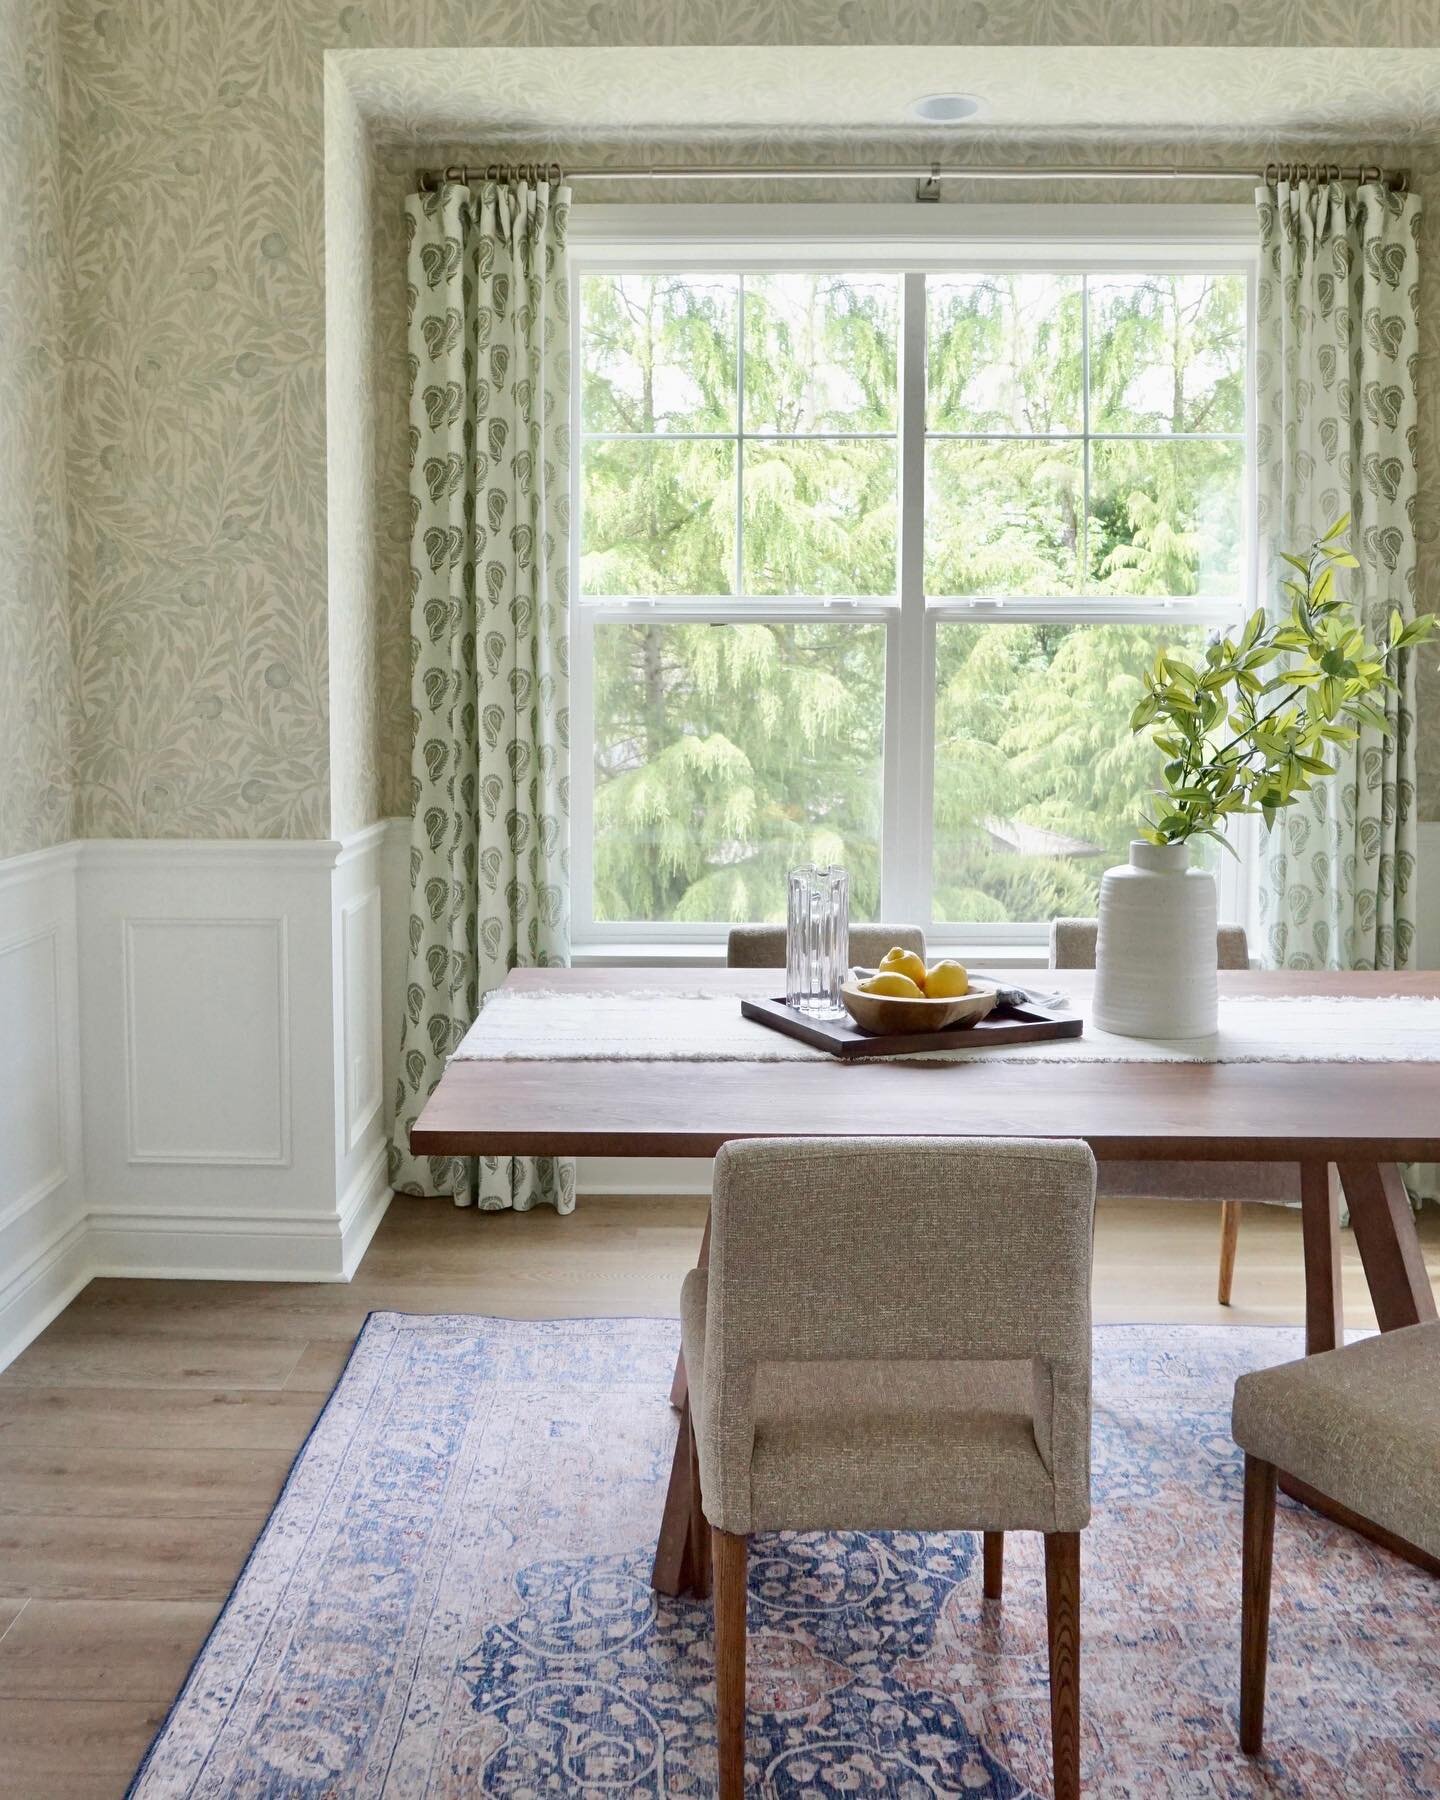 We&rsquo;re excited to share the dining room of our newest project today! The mix of pattern with neutral furnishings creates a timeless space, with personality, to gather at for years to come. Swipe for the before ✨